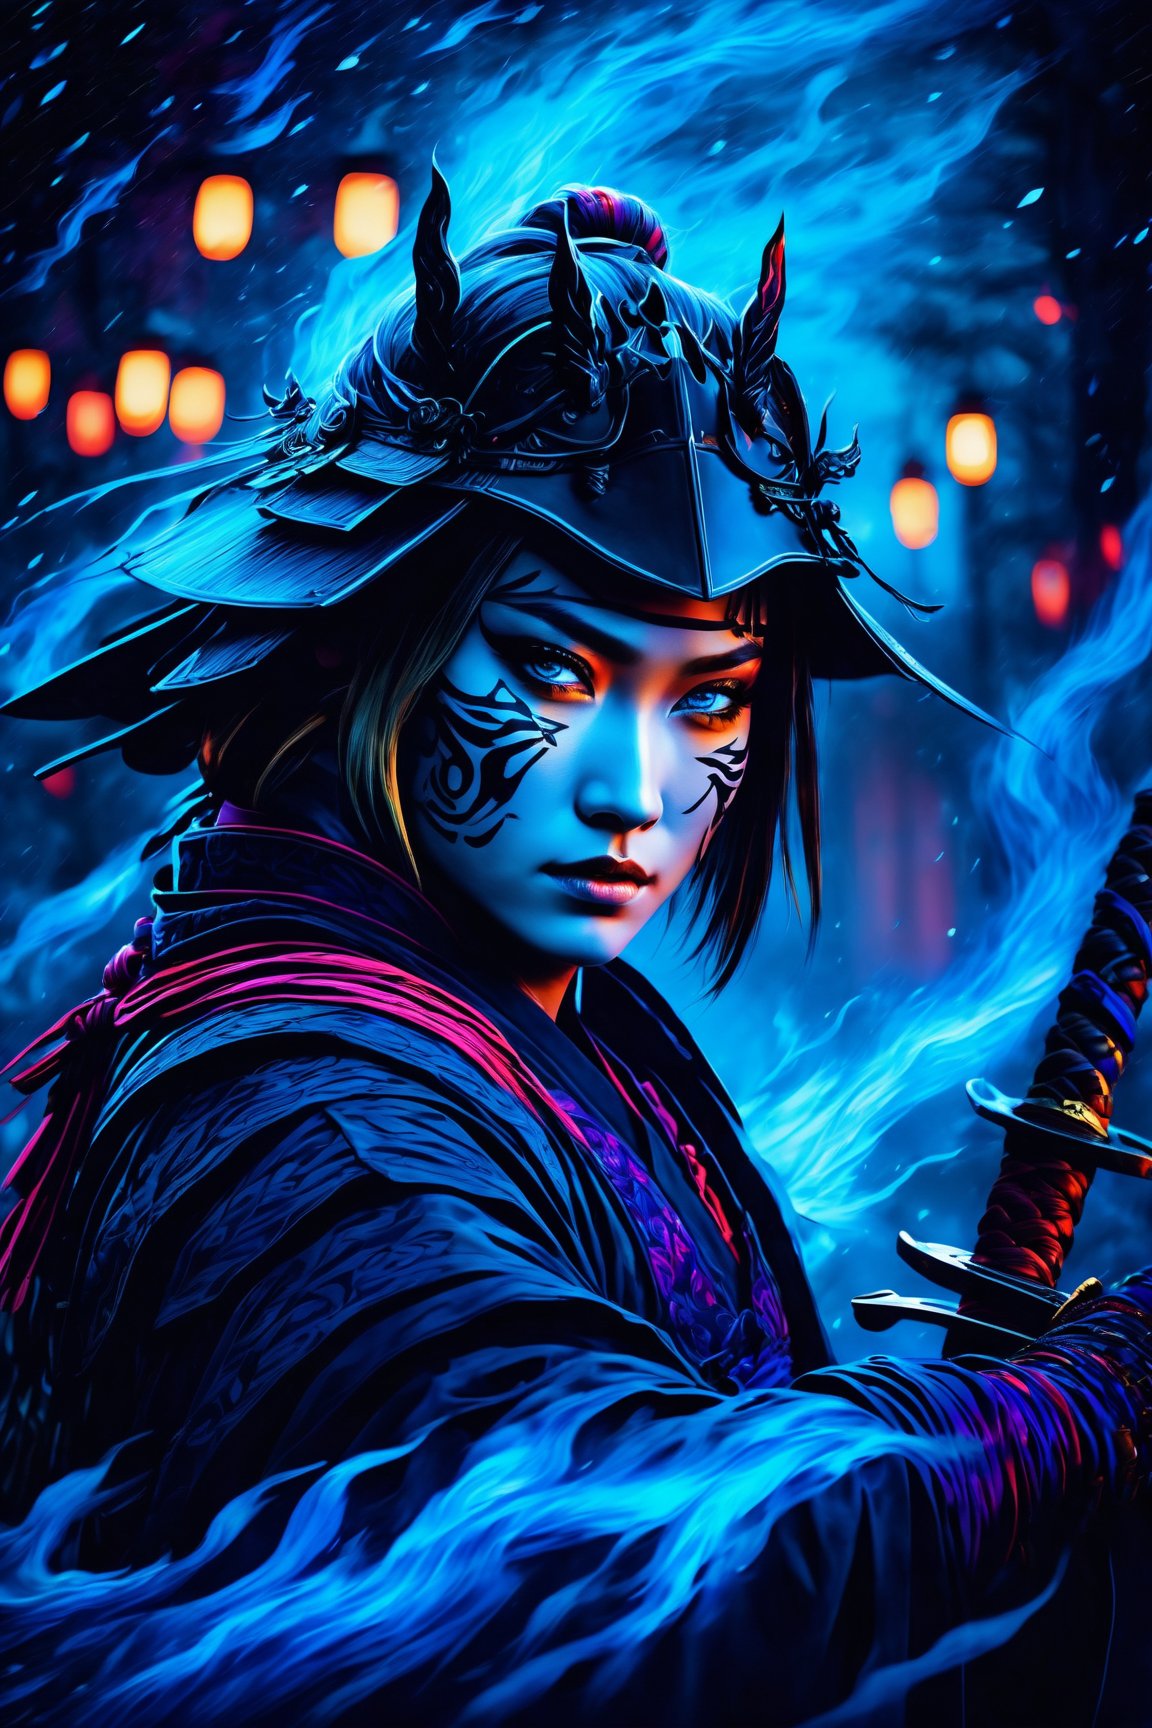 (best quality, 8K, highres, masterpiece), ultra-detailed, watercolor-style fantasy art with vibrant and colorful tones. Use tetradic dark colors to depict a samurai in a (dark souls environment), with a focus on the face illuminated by a dark holographic glow in dim light. The samurai, a female with blonde bob hair, is wearing a white cloak with a hood, covering the face. The artwork should feature sharp focus, with magical ((glowy blue burning eyes)) creating a visually striking and colorful concept art. Infuse the scene with lots of thunder, enhancing the overall dynamic and fantastical atmosphere.